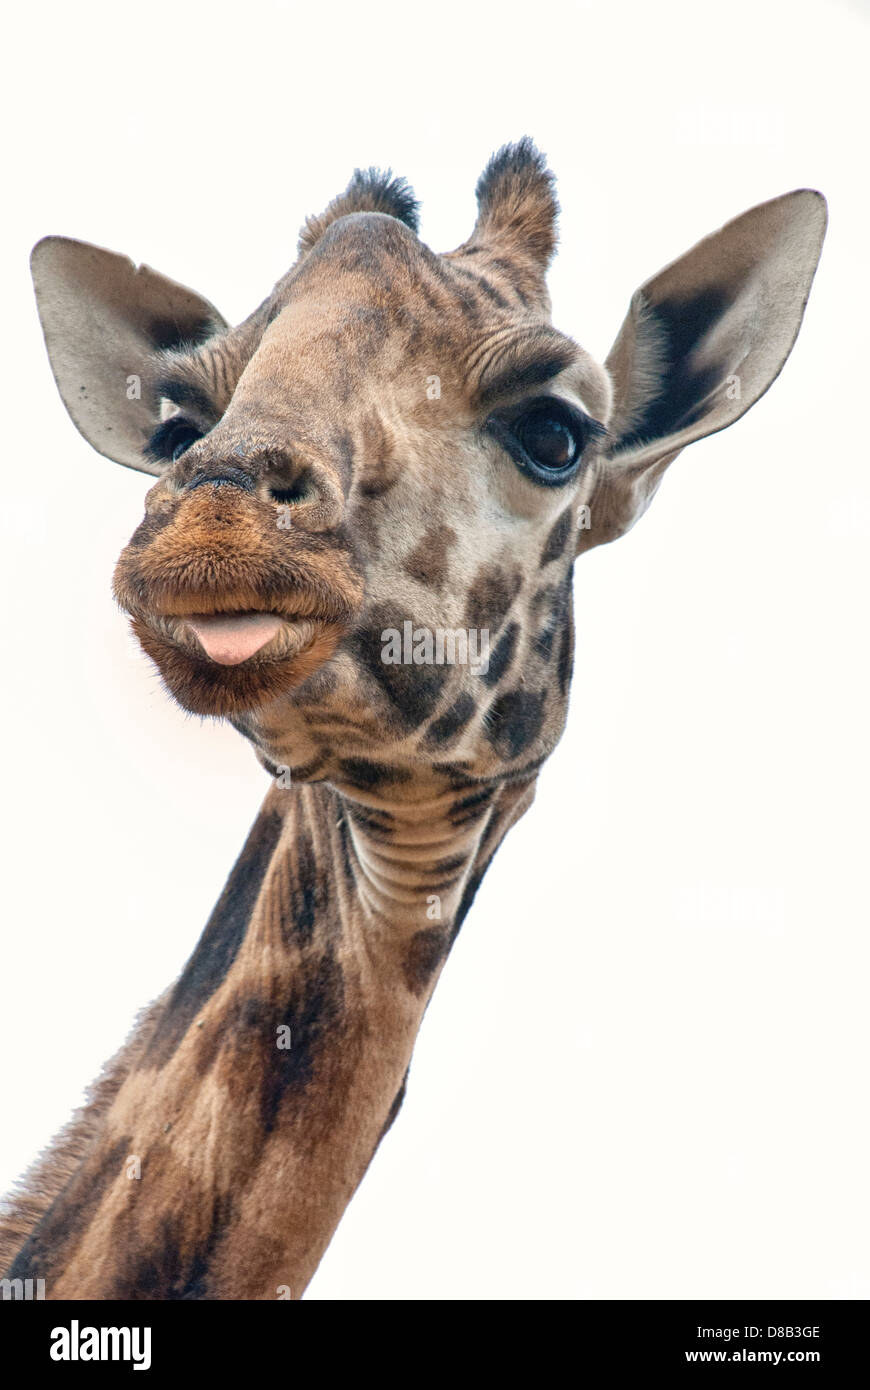 Head shot of a Rothschild Giraffe, with a bit of tongue sticking out, Kenya, Africa Stock Photo